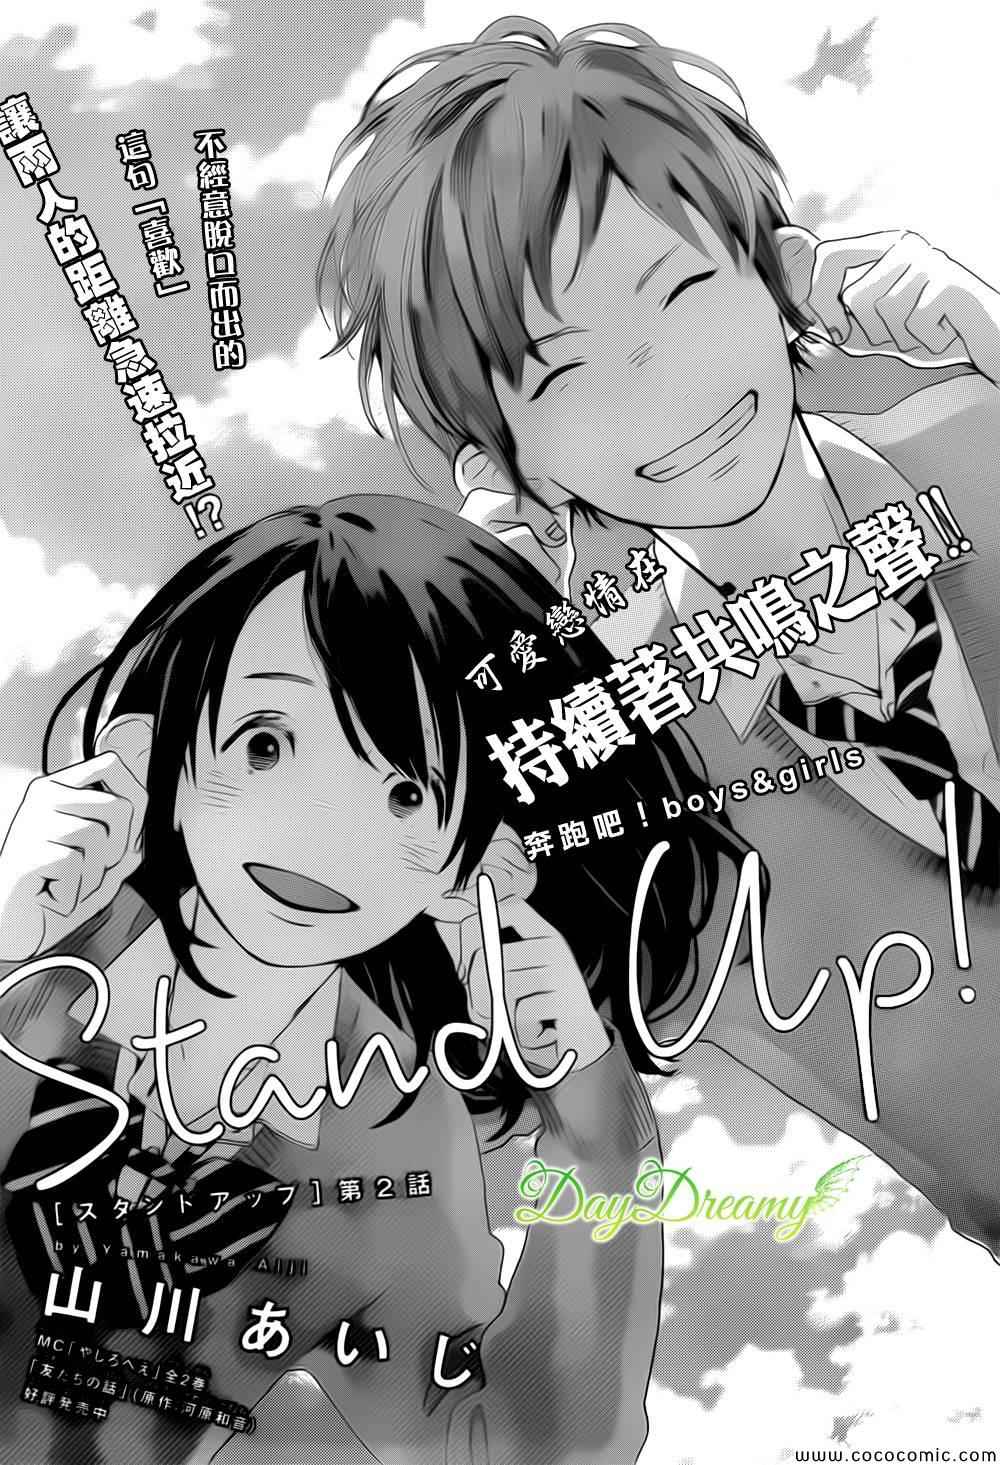 Stand Up 漫畫stand Up 002集 第1頁 Stand Up Stand Up 002集 Stand